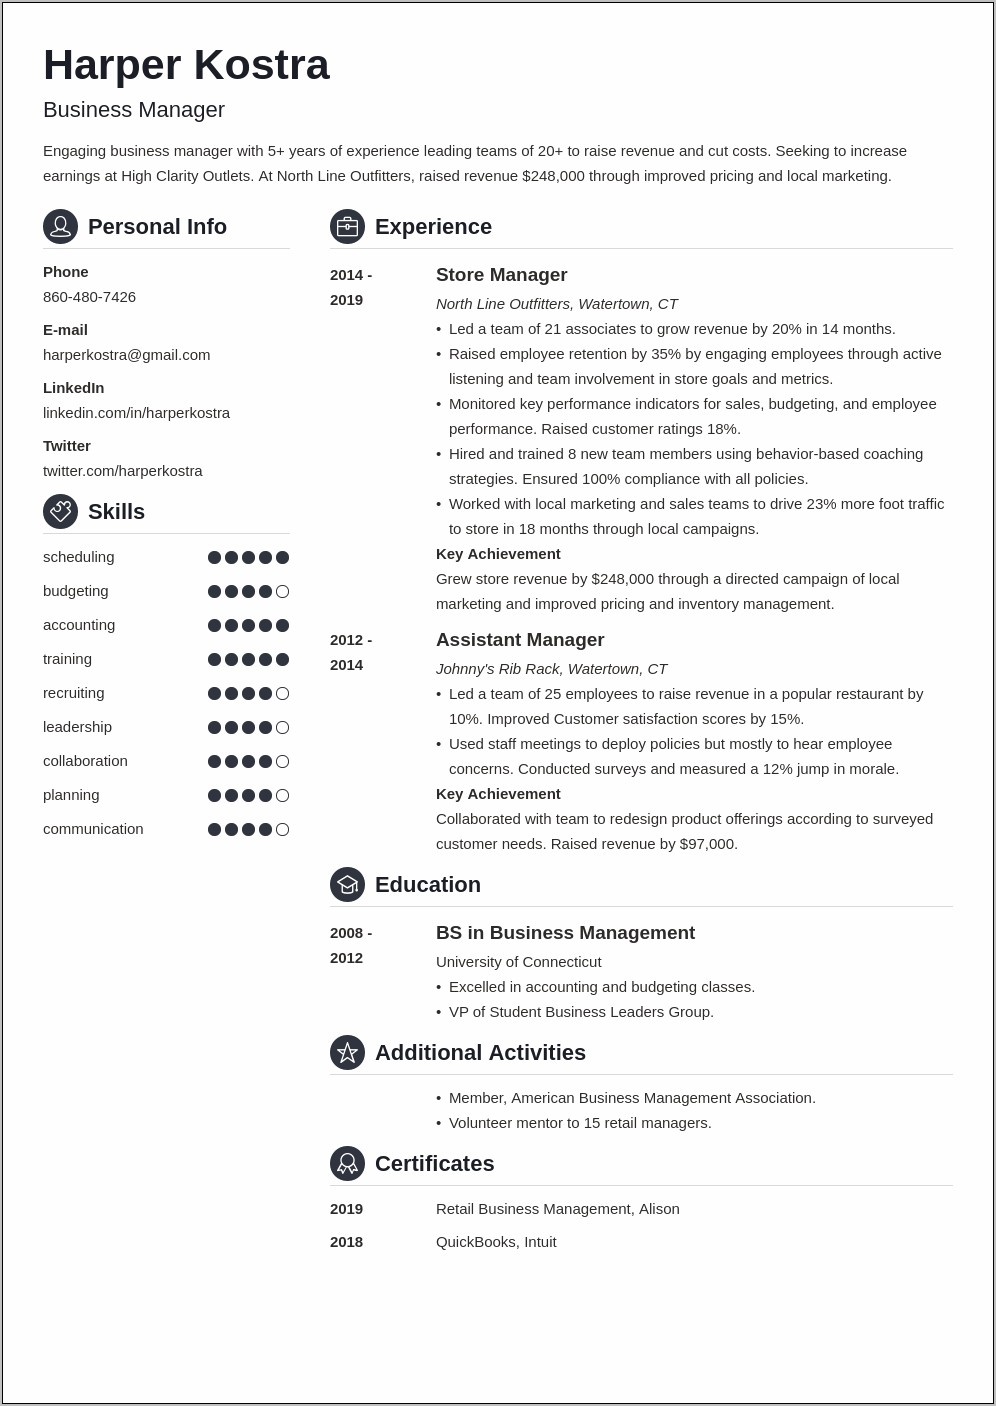 Resume Summary For Business Manager